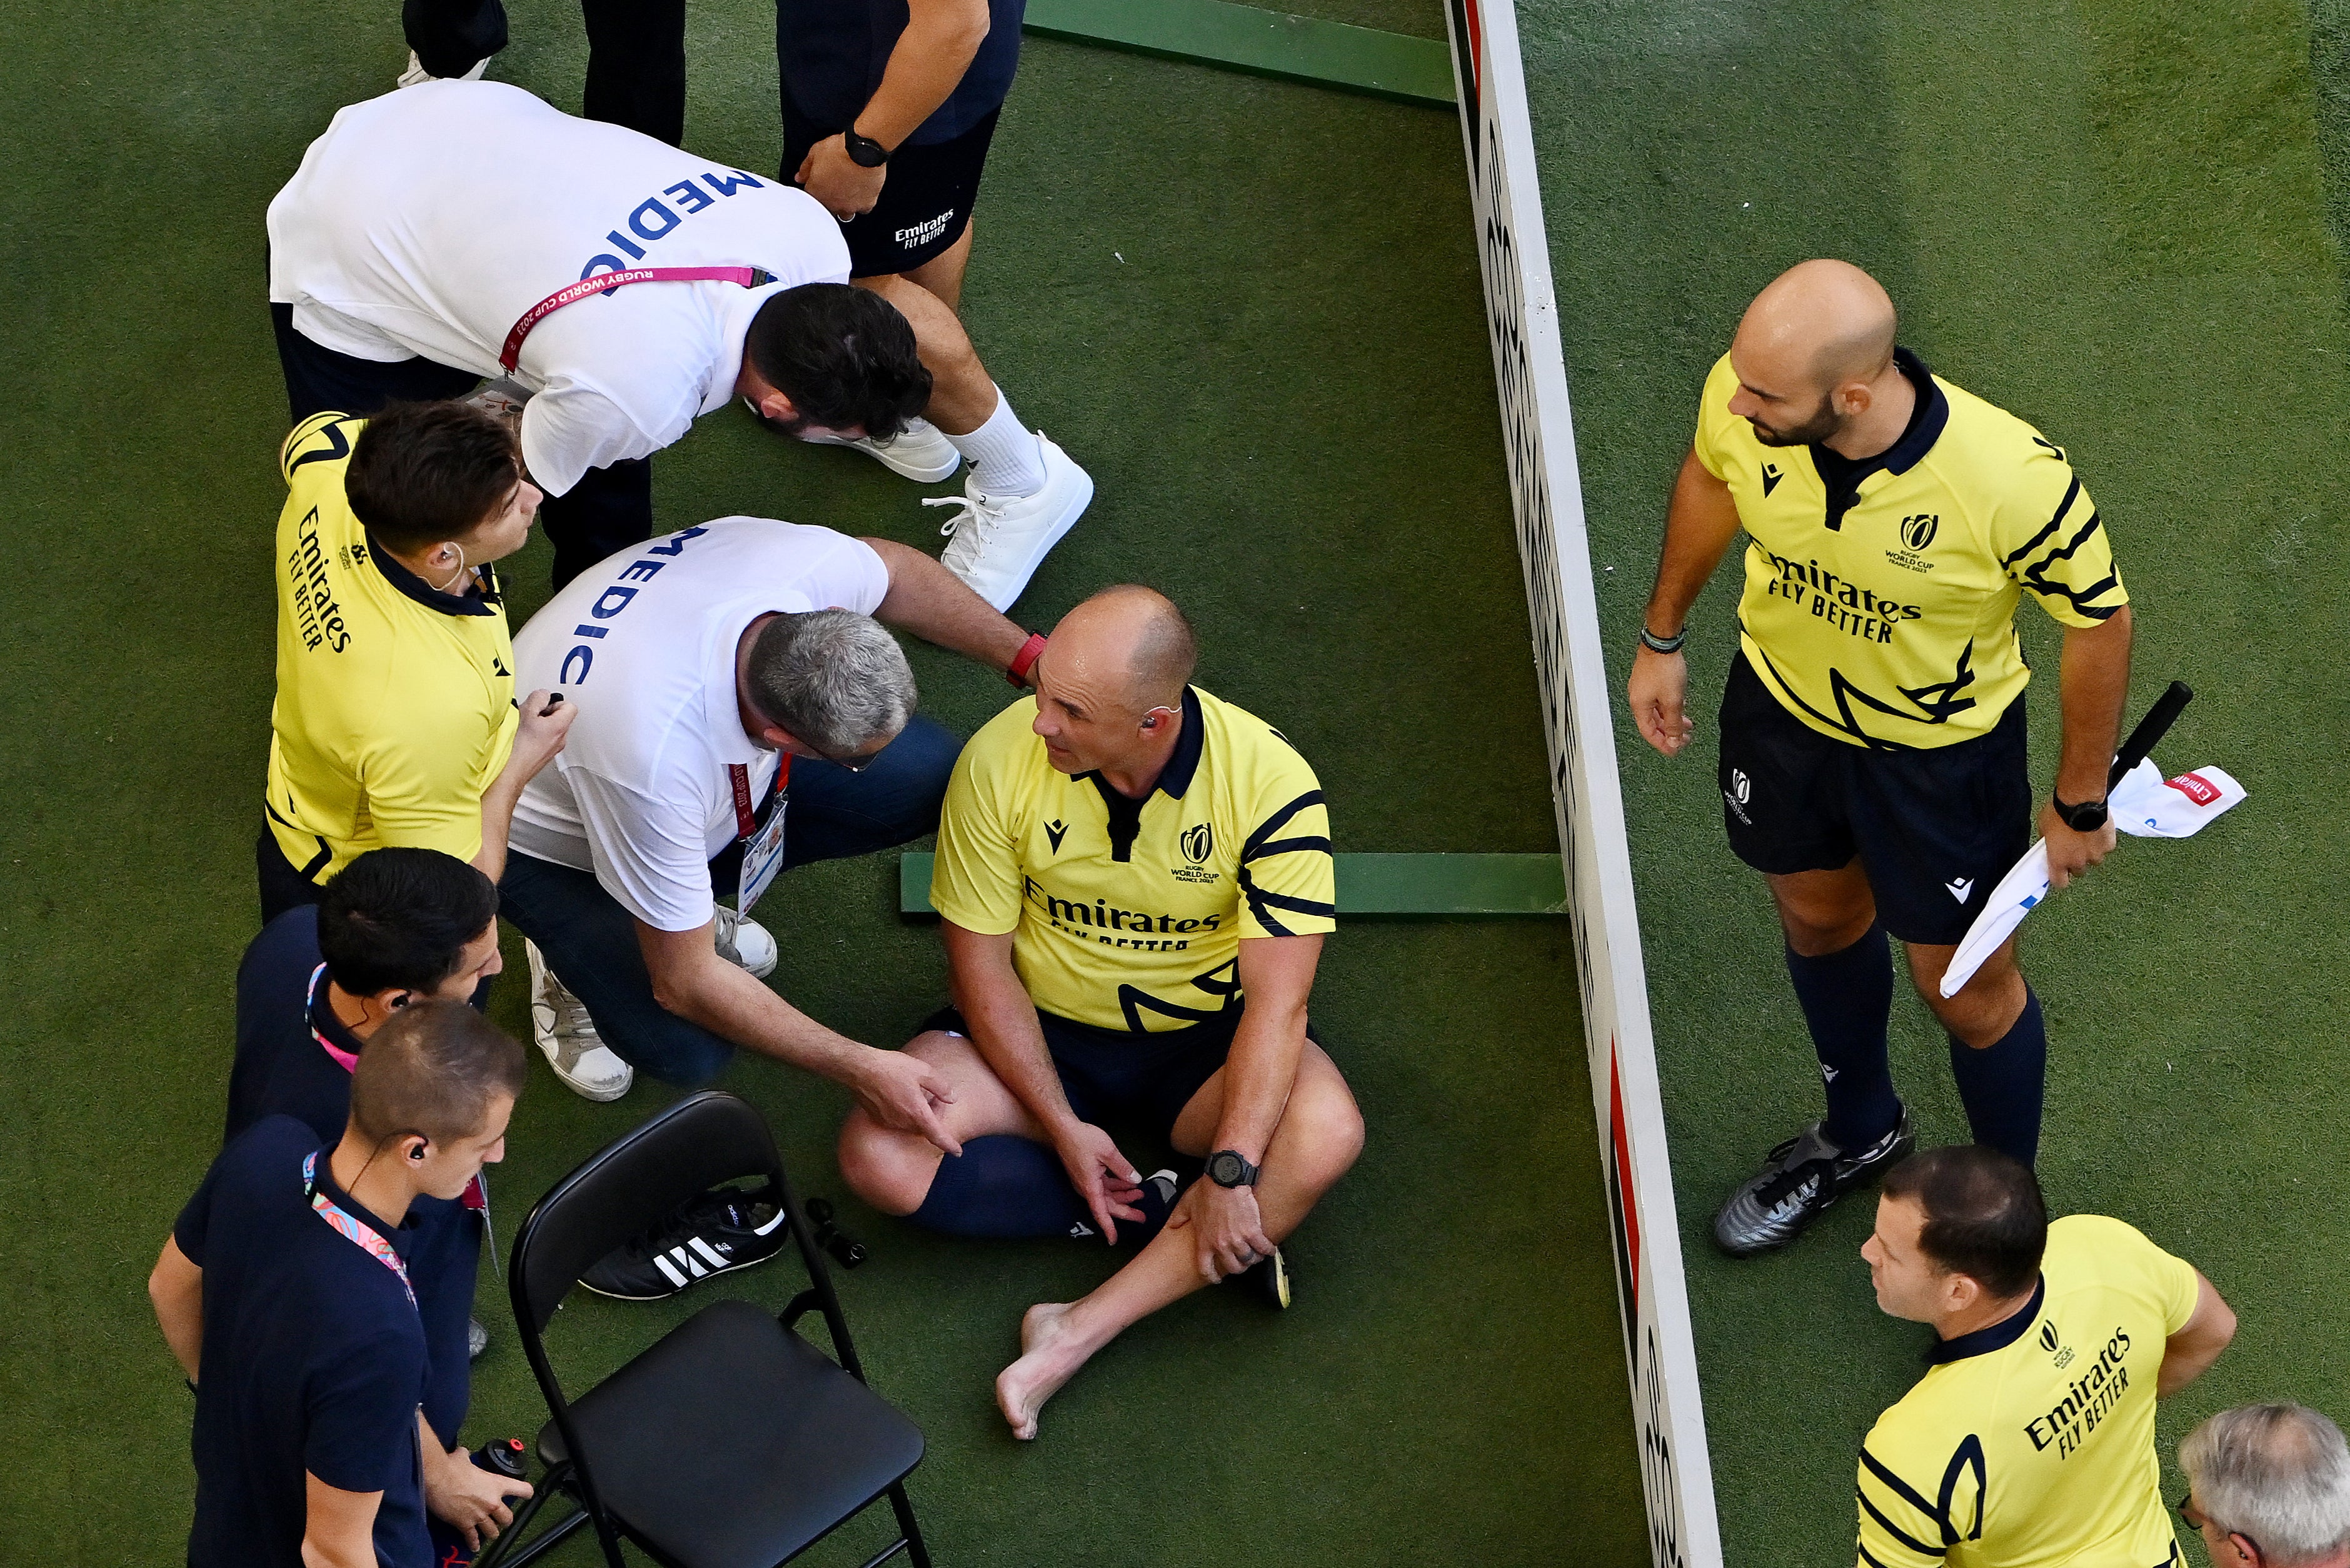 Referee Jaco Peyper was forced off with an injury